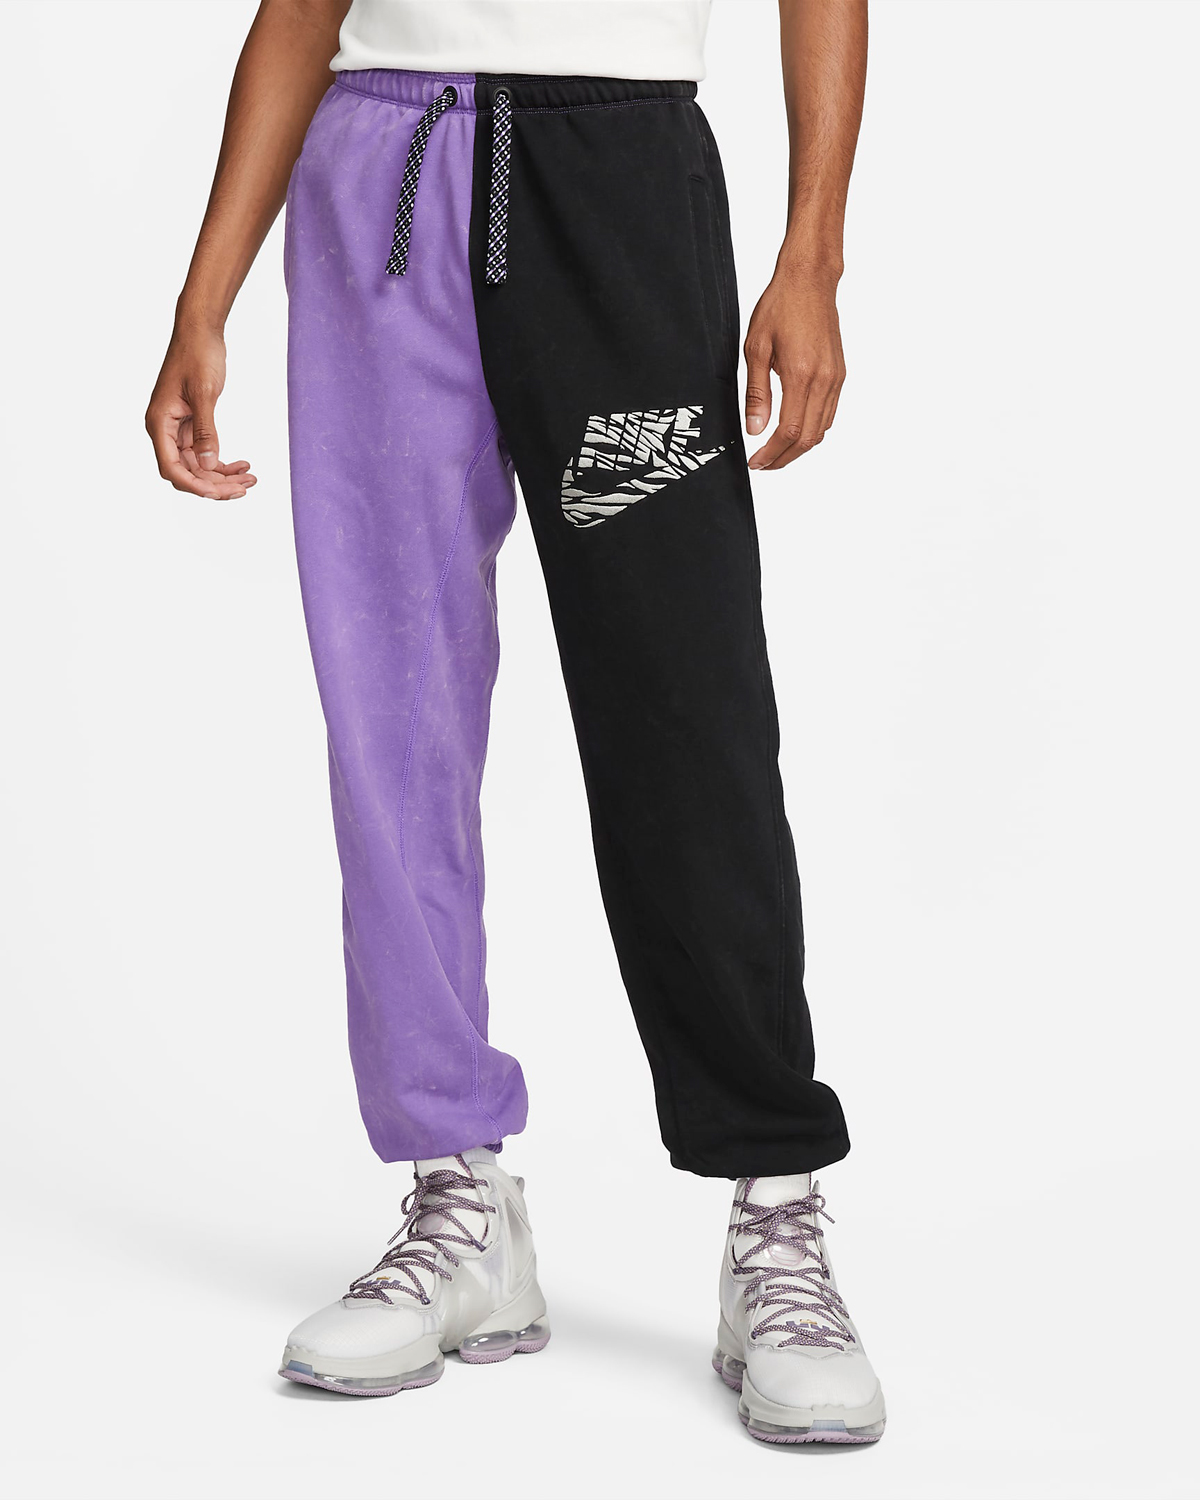 Nike-Standard-Issue-Basketball-Pants-Action-Grape-Black-Gold-1